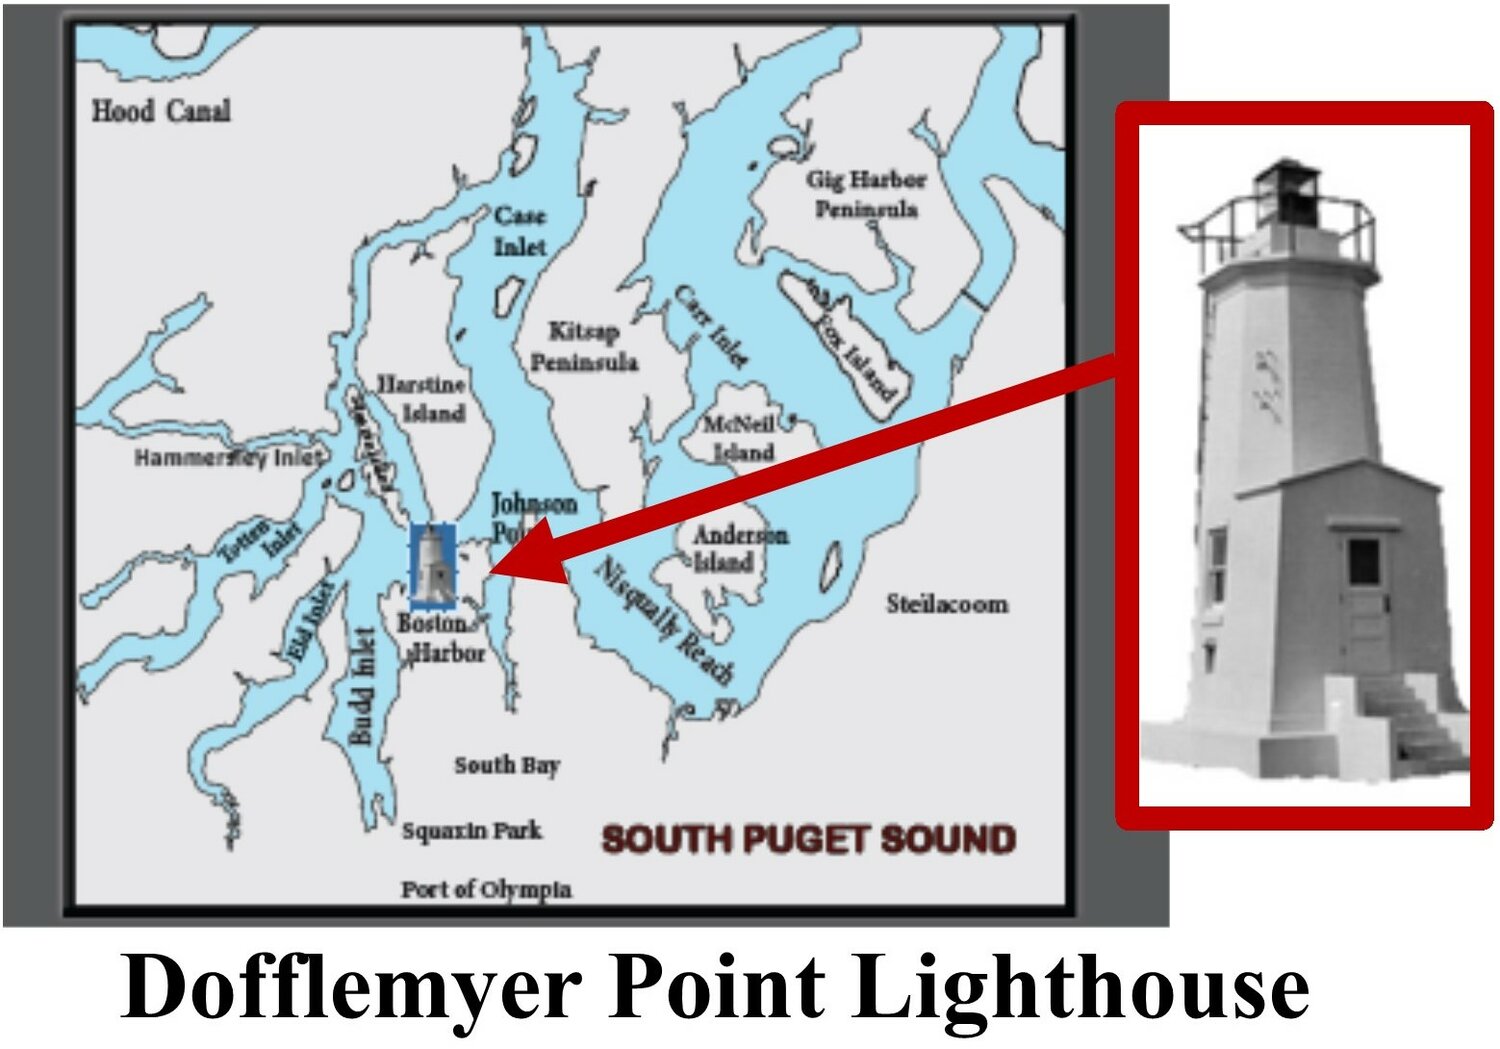 A 1934 image of the Dofflemyer Point lighthouse from the U.S. Coast Guard paired with a South Puget Sound map, courtesy of the WA State Department of Fish and Wildlife Center.